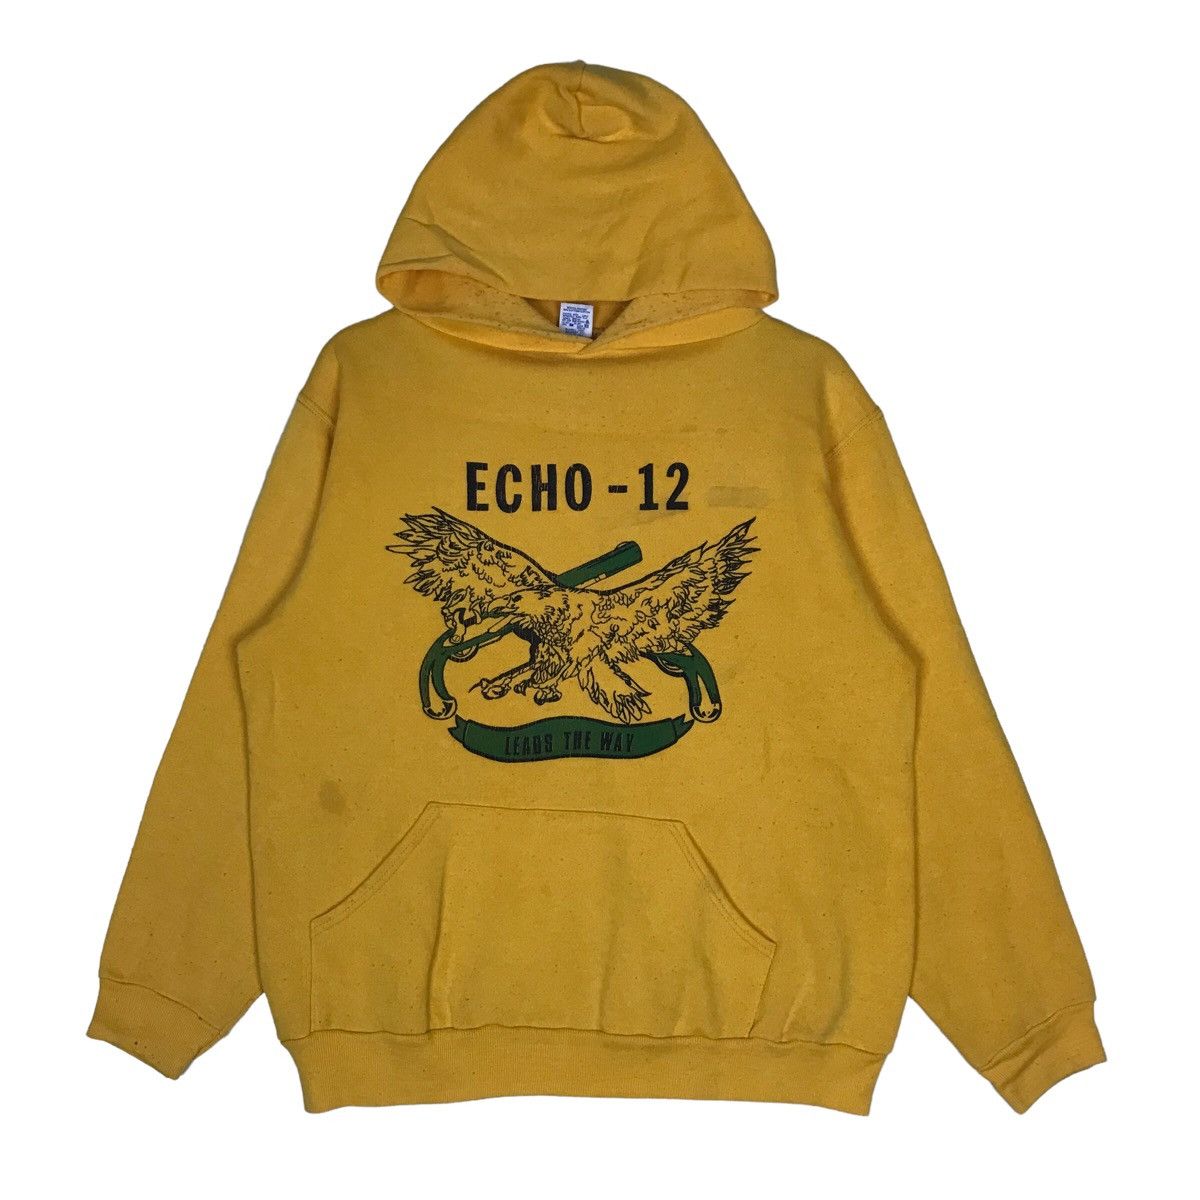 Russell Athletic Vintage 90s Russell Echo Eagle Hoodie Pullover Size US M / EU 48-50 / 2 - 1 Preview